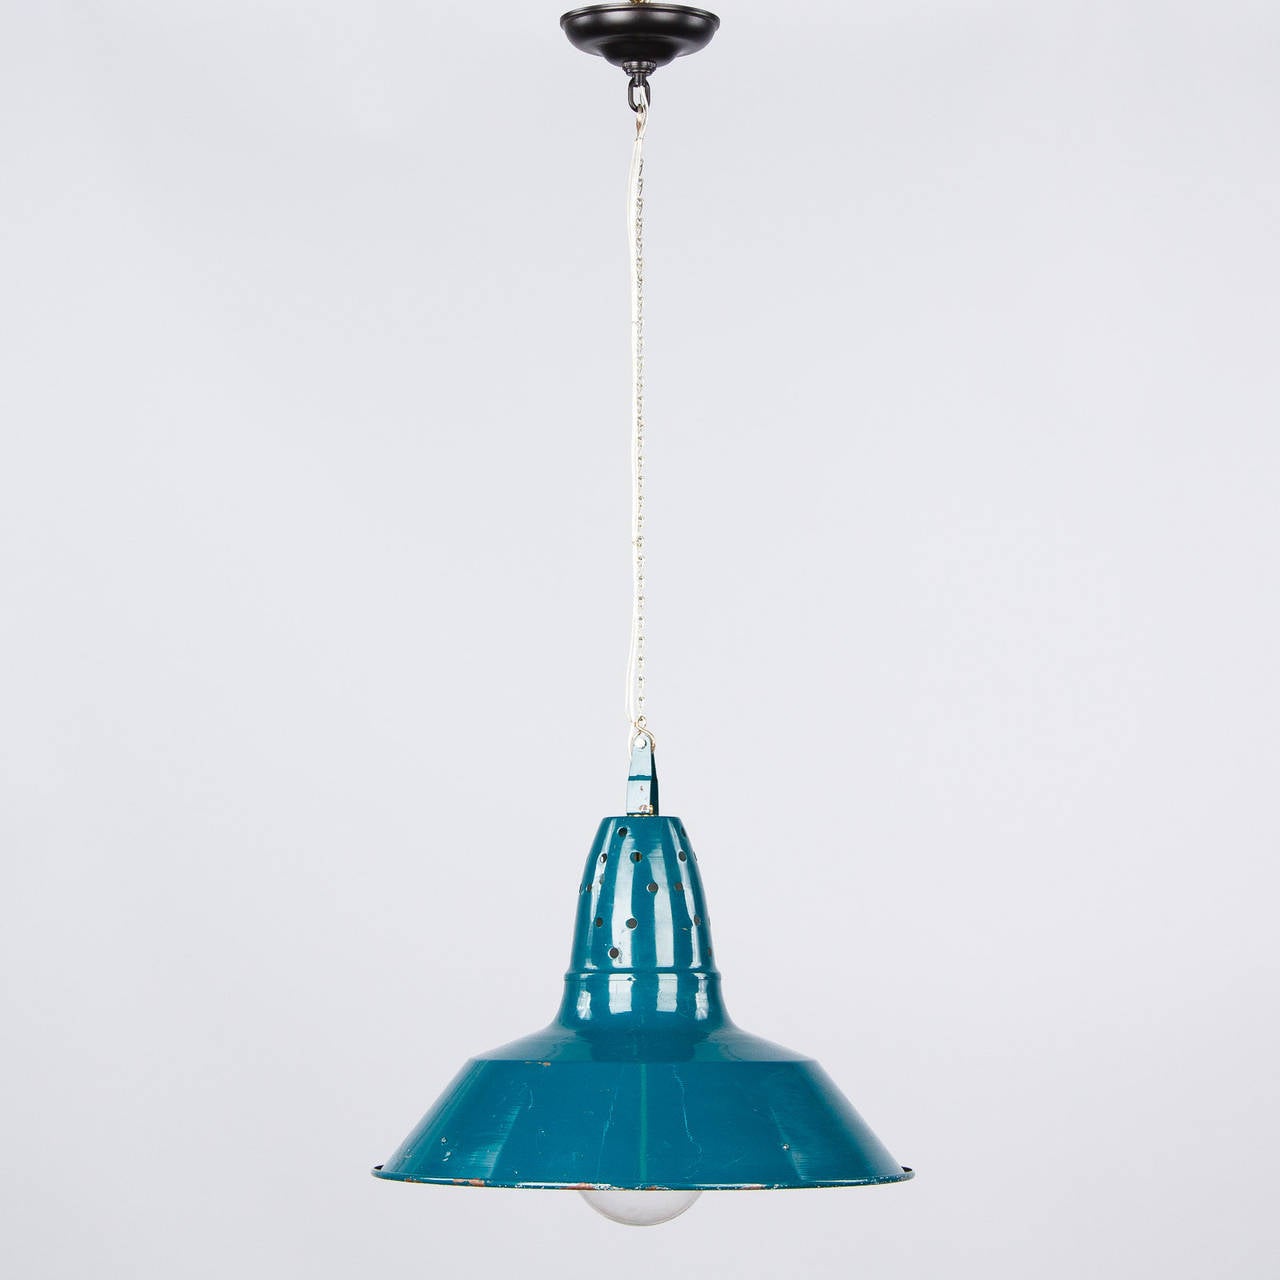 A pair of 1950s French Industrial Suspension Lights in green metal. The chain and canopy add 24